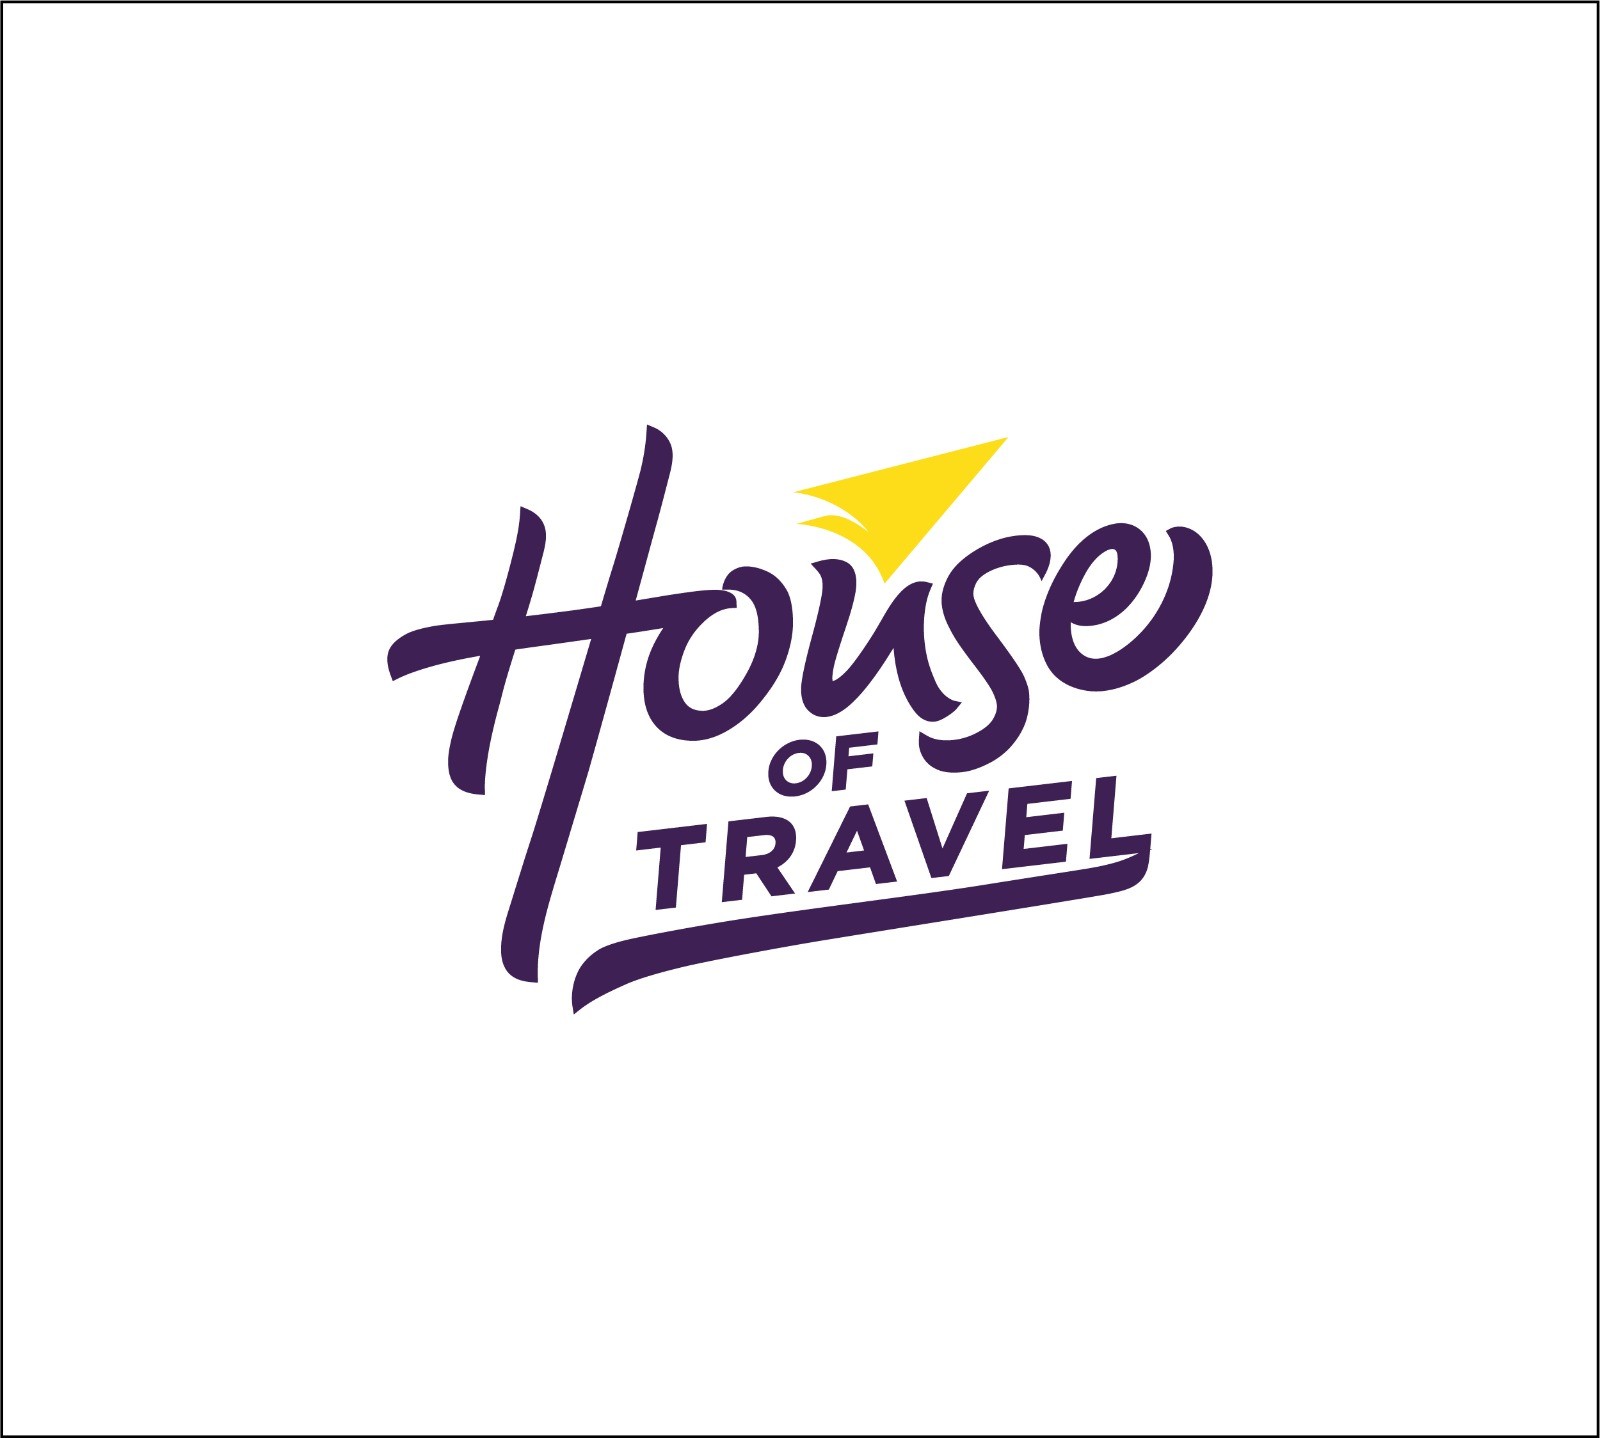 HOUSE OF TRAVEL